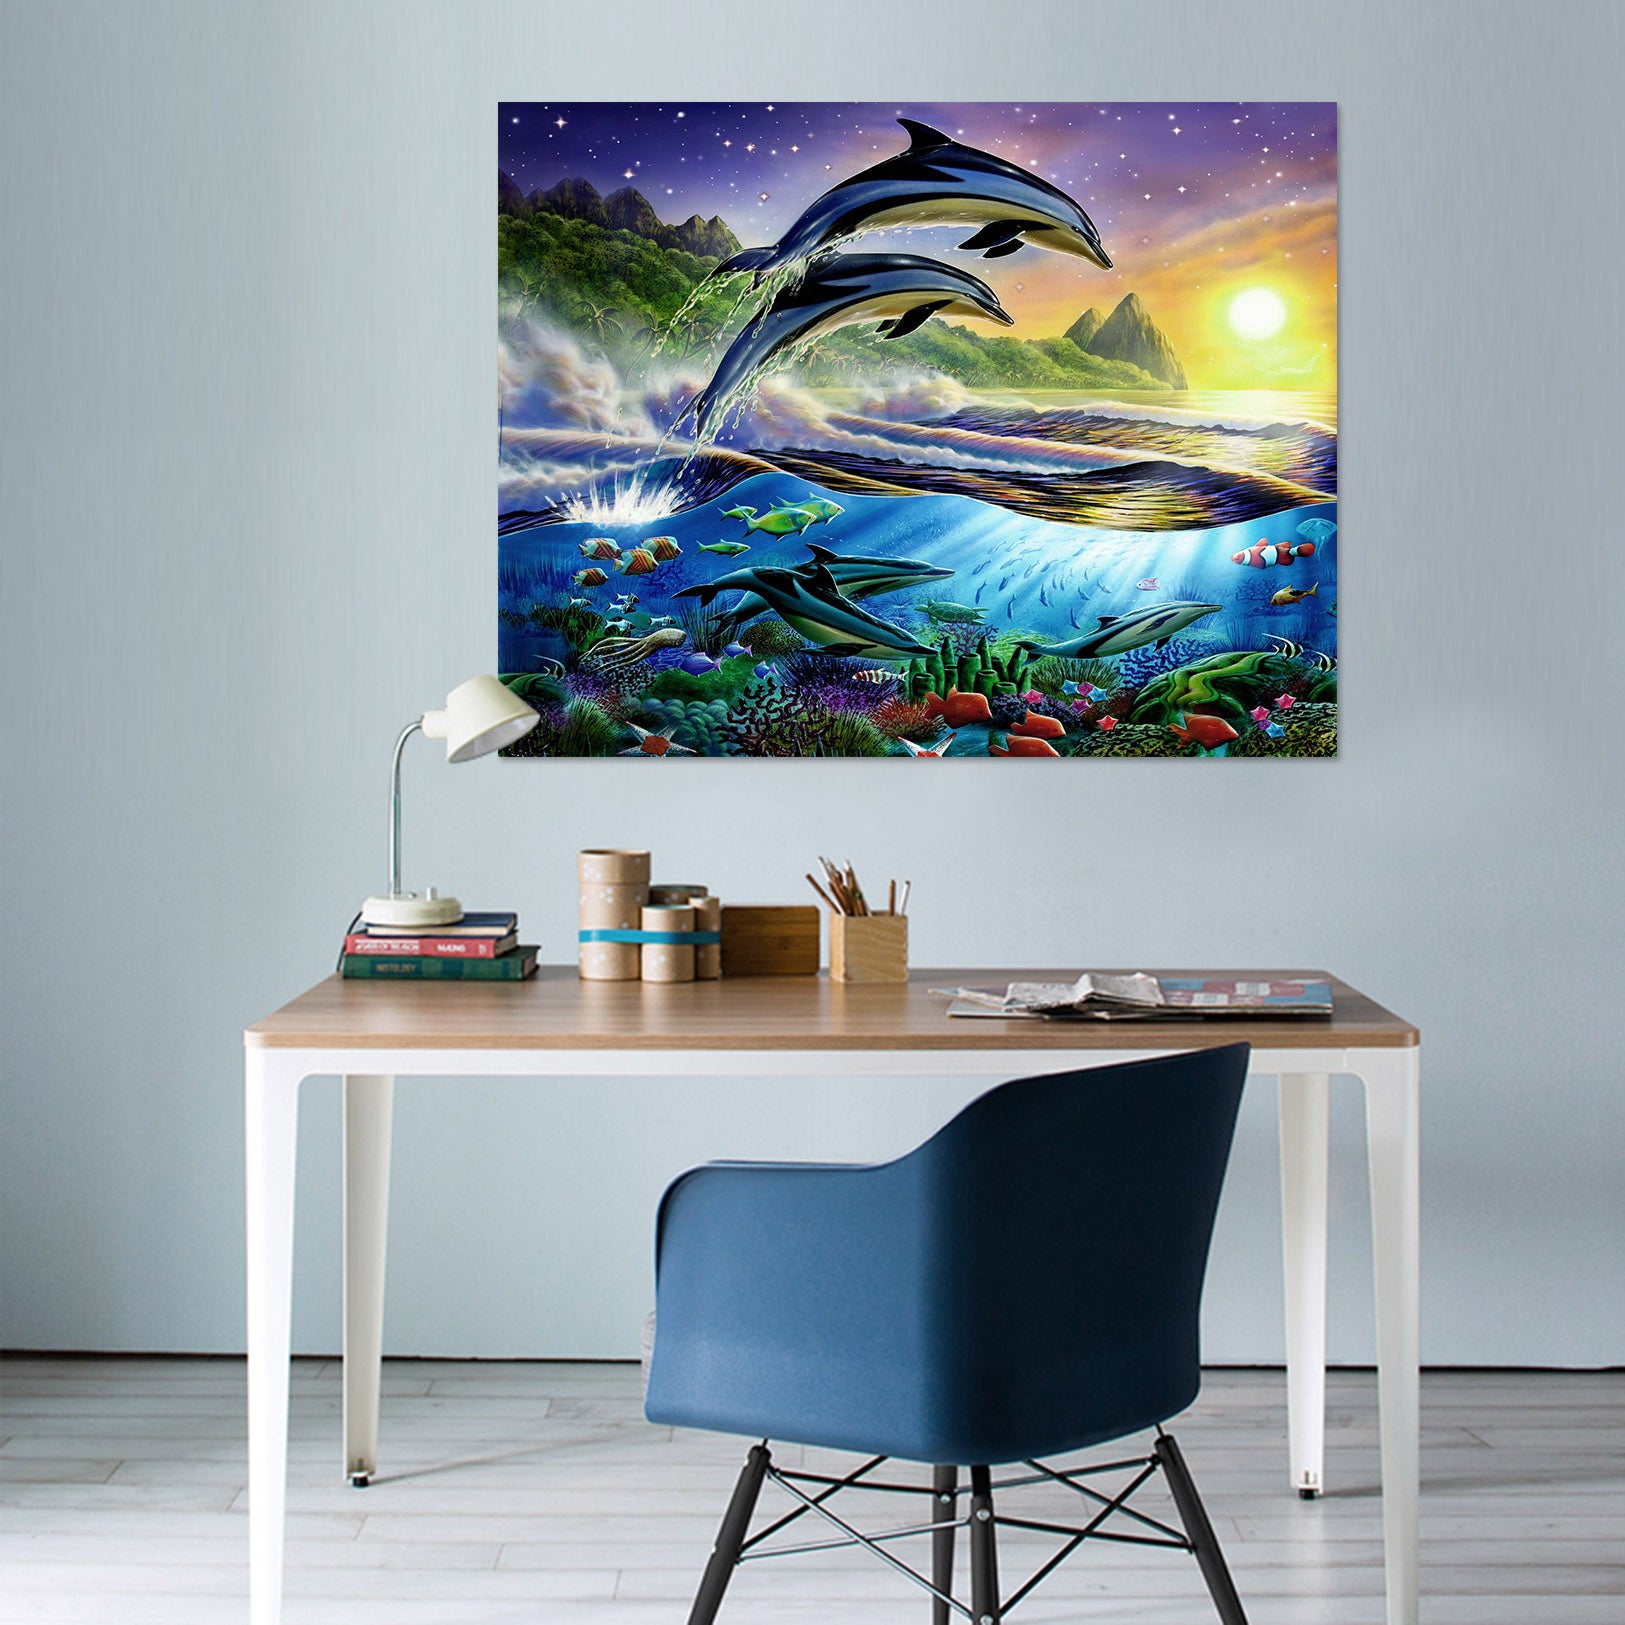 3D Painting Dolphin 001 Adrian Chesterman Wall Sticker